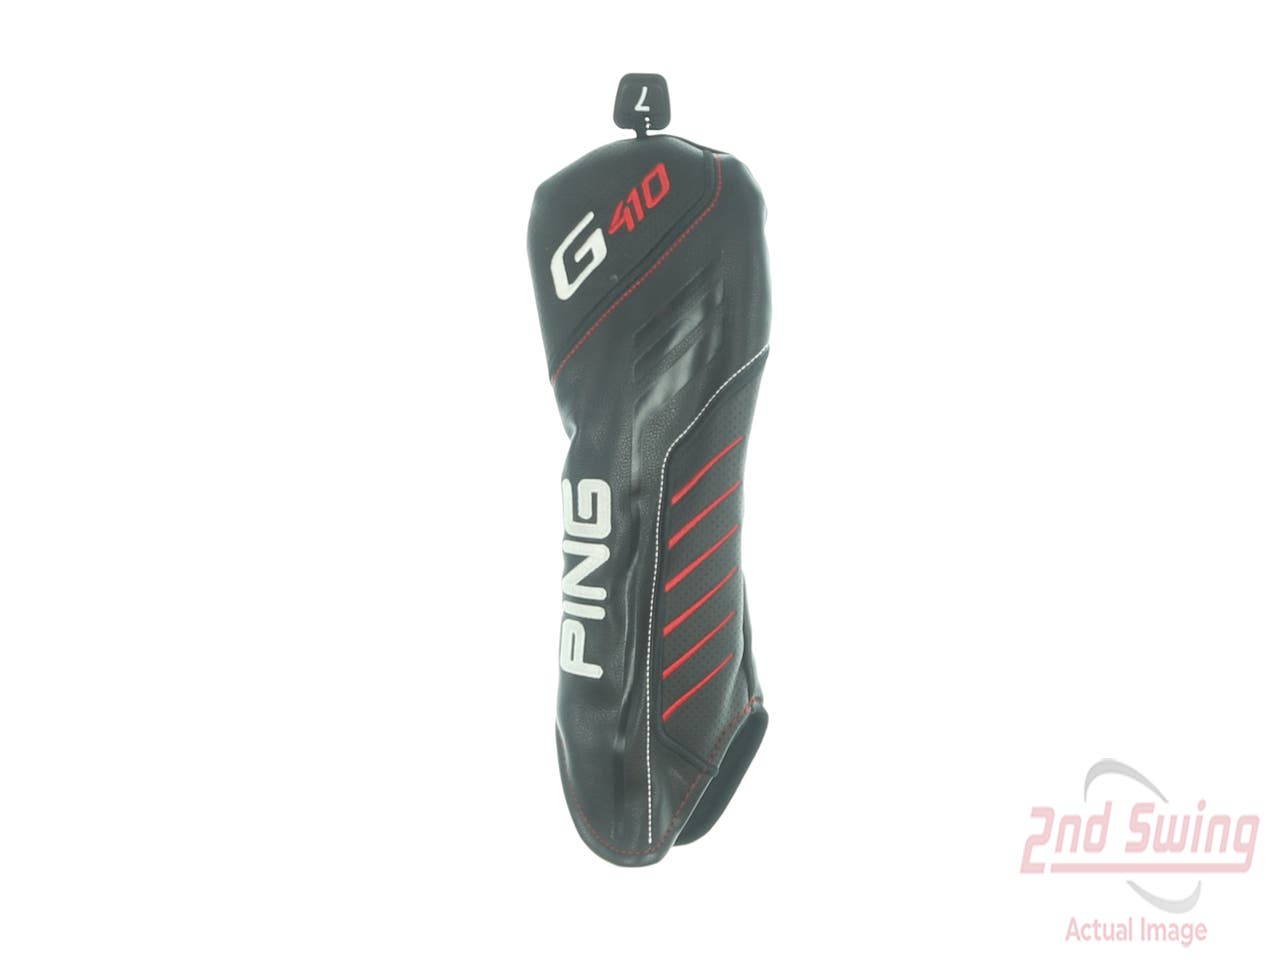 Ping G410 7 Fairway Wood Headcover Black and Red with Tag